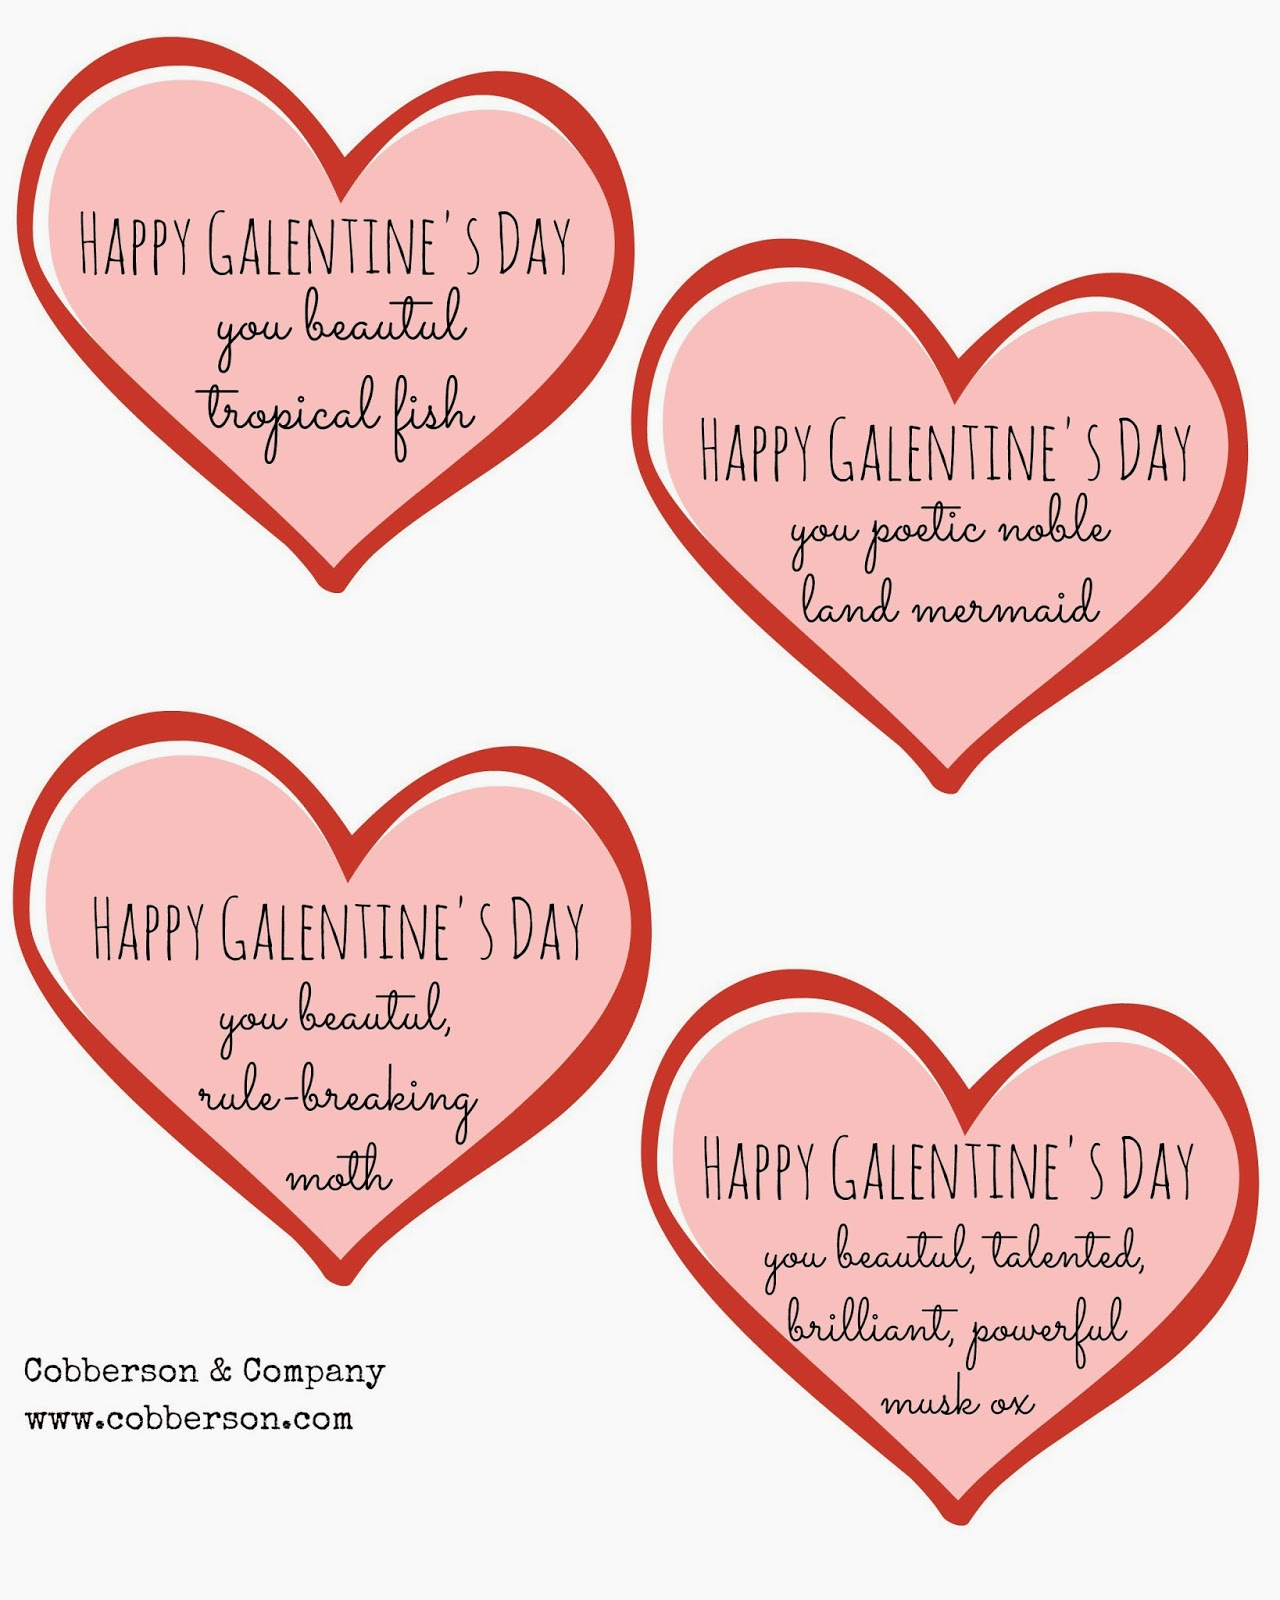 Happy Galentine's Day, you noble DIYer! + Free Printable | Cobberson + Co.1280 x 1600